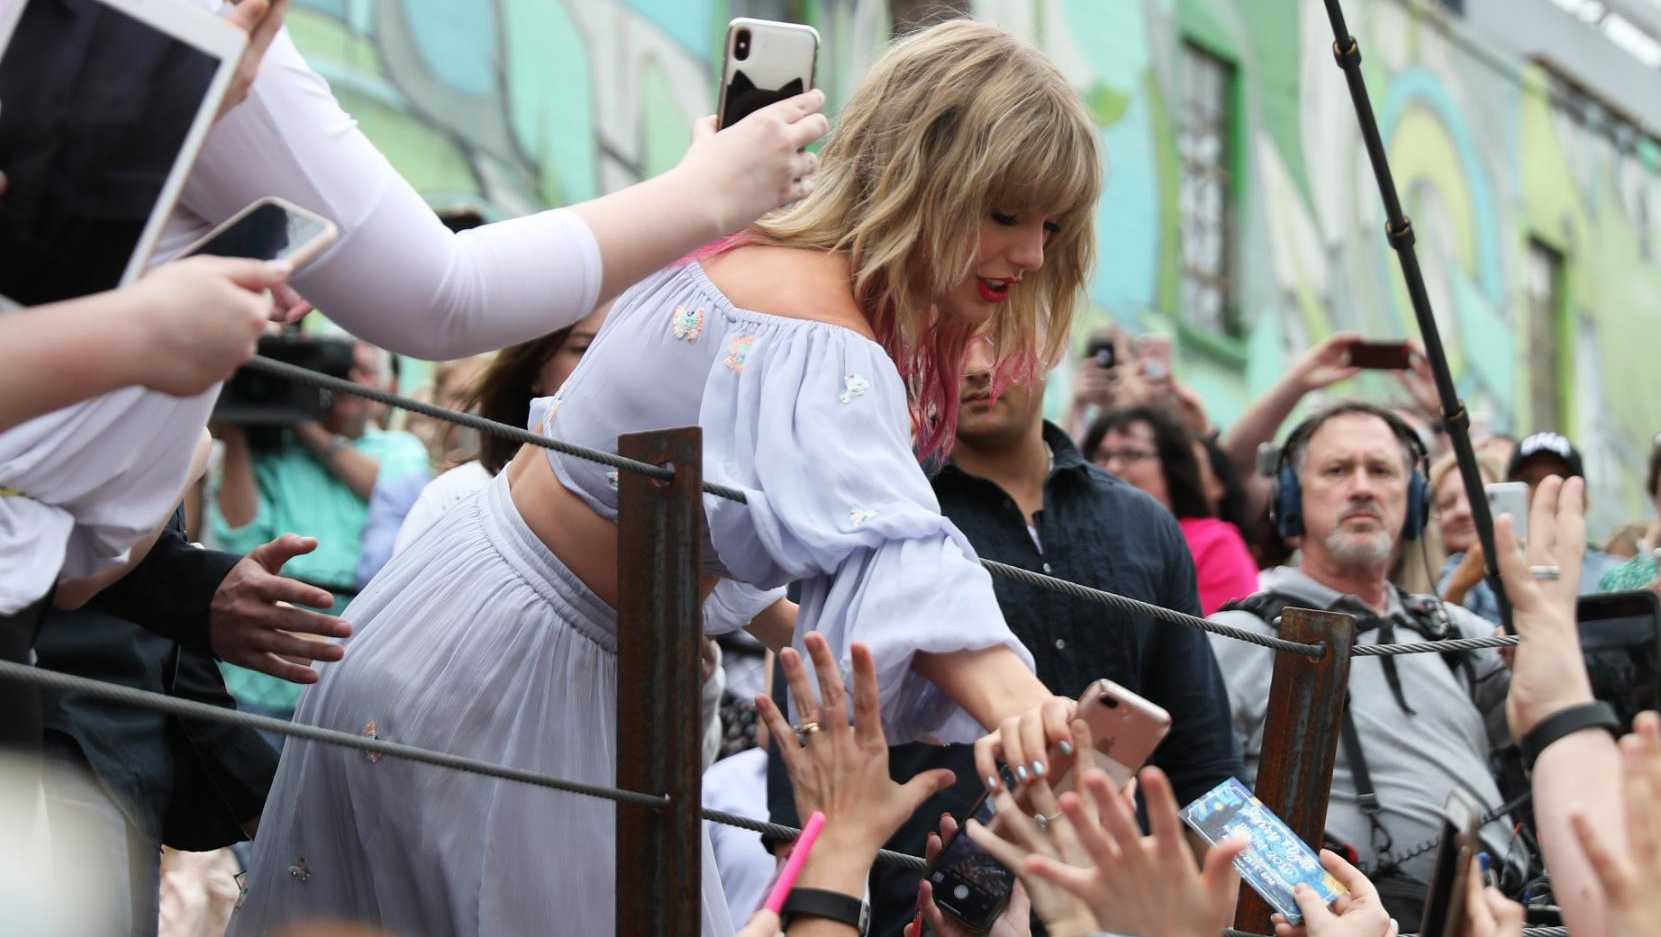 More than two dozen Taylor Swift fans sue Ticketmaster